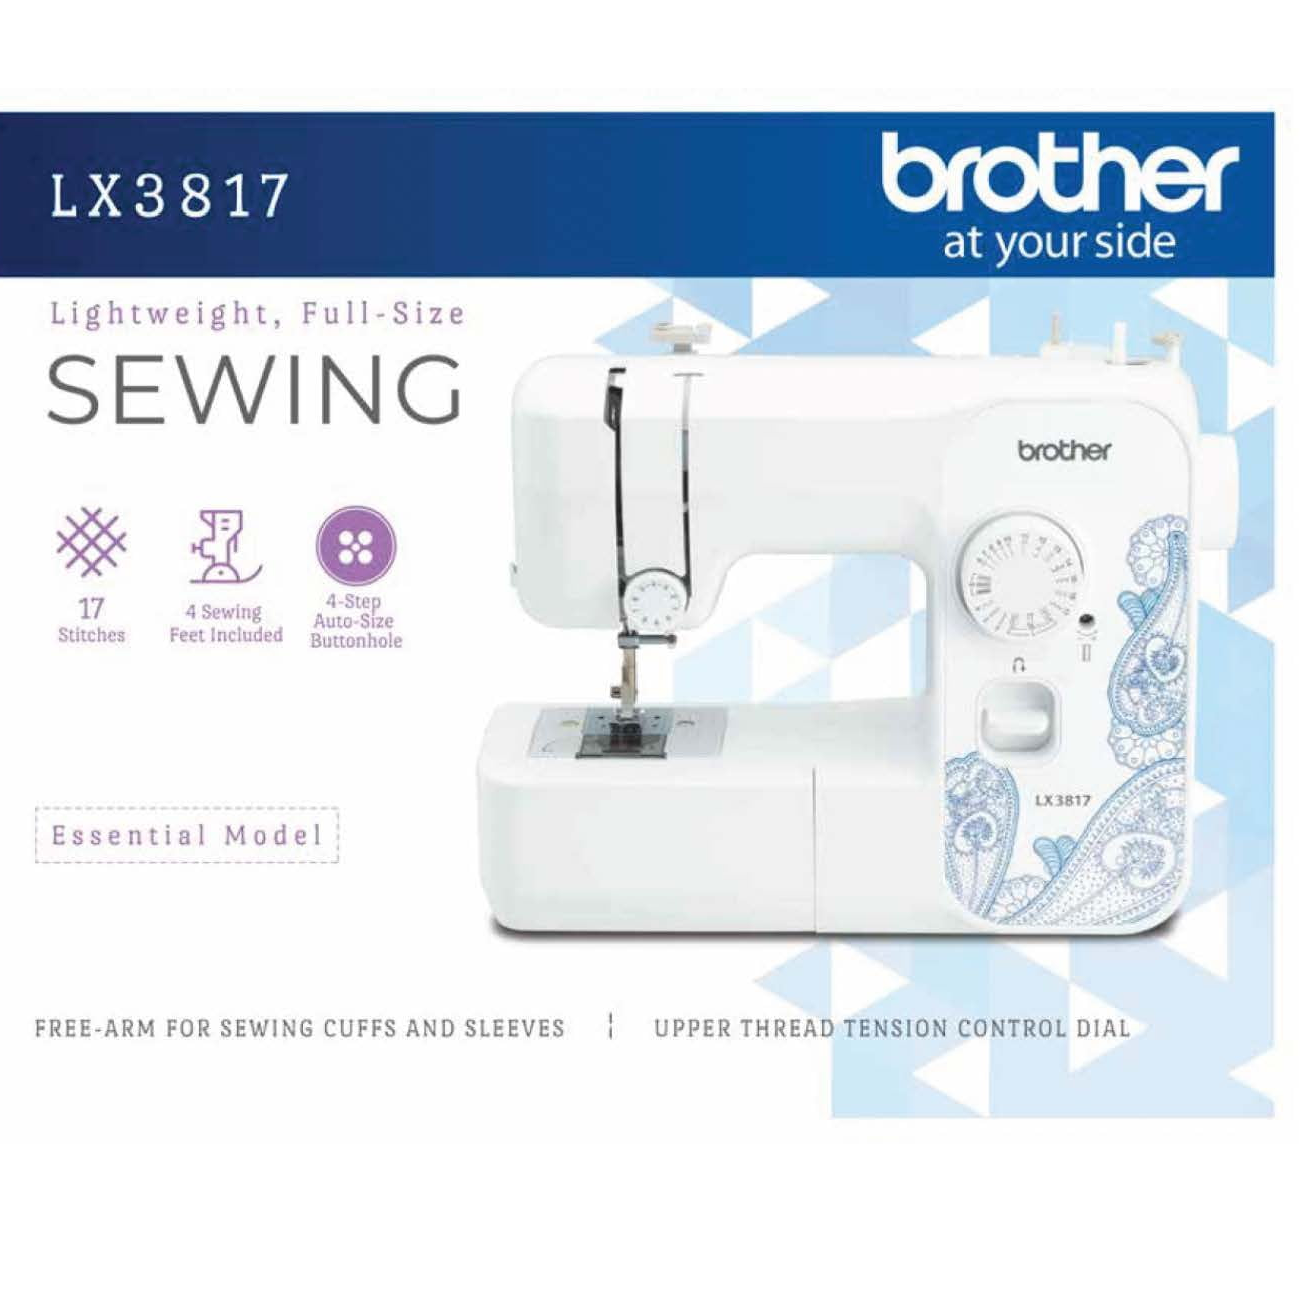 Brother LX3817 17-Stitch Portable Full-Size Sewing Machine, White - image 3 of 13